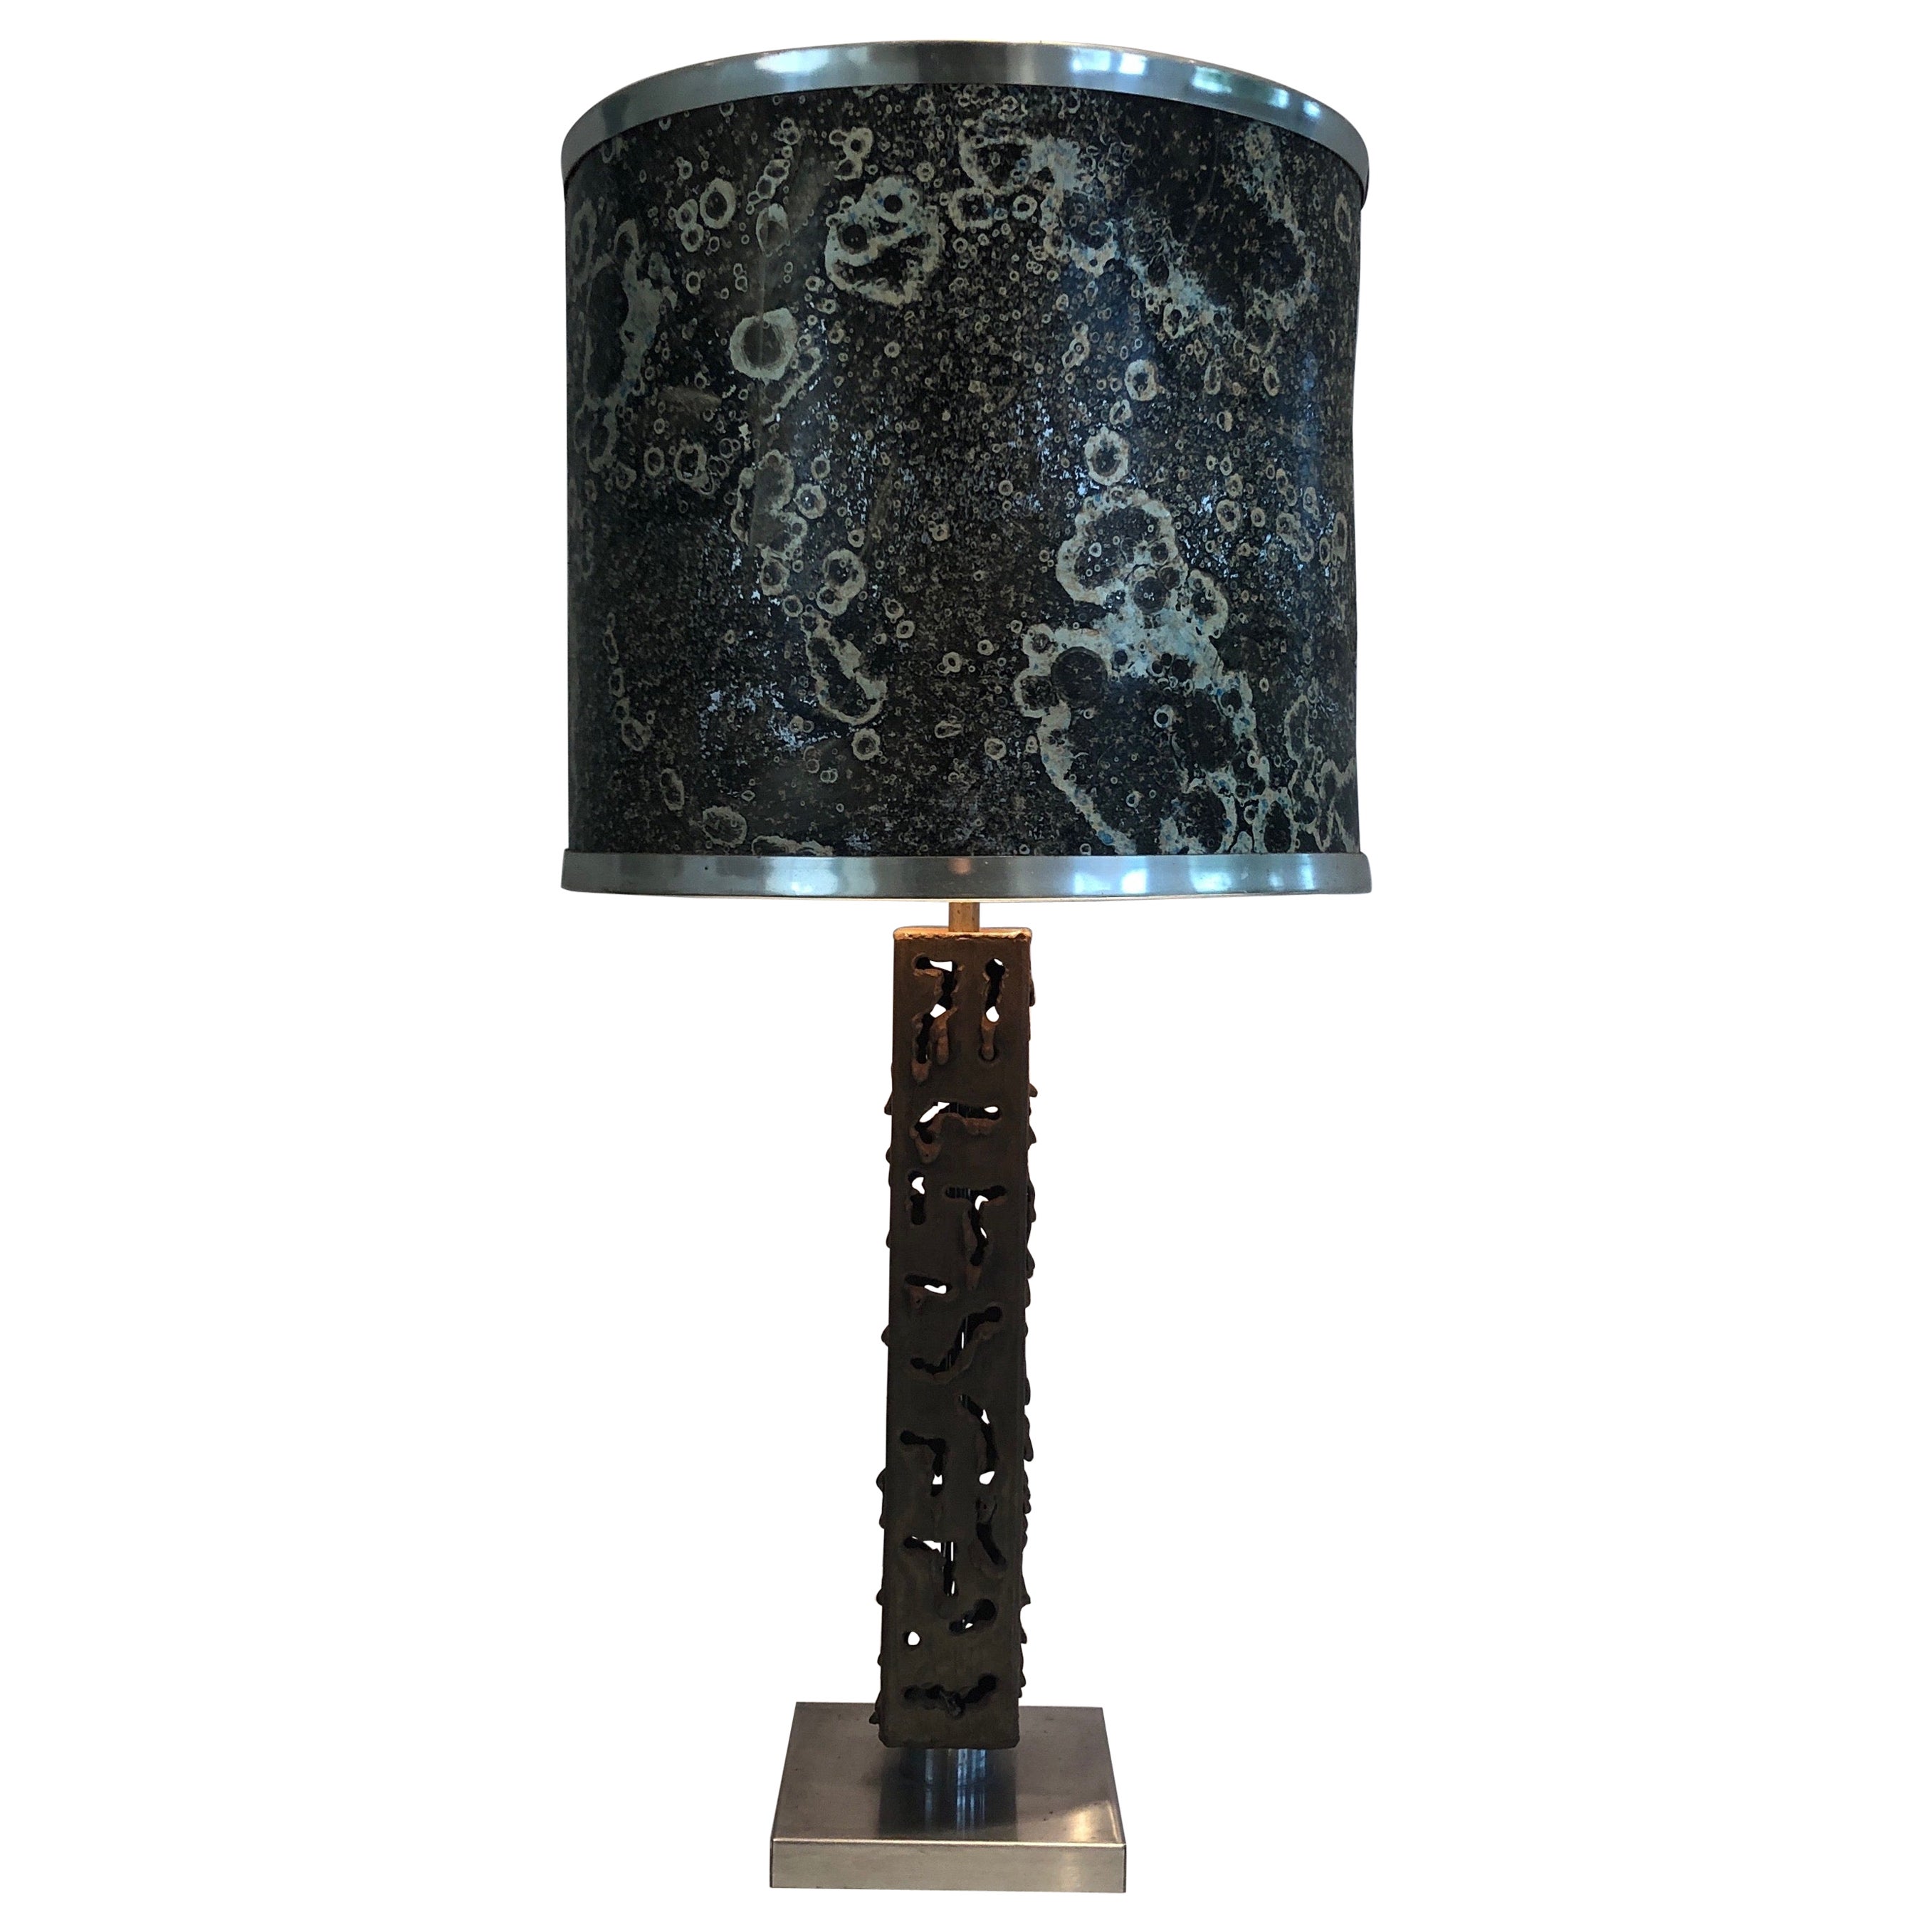 Worked Steel Design Table Lamp